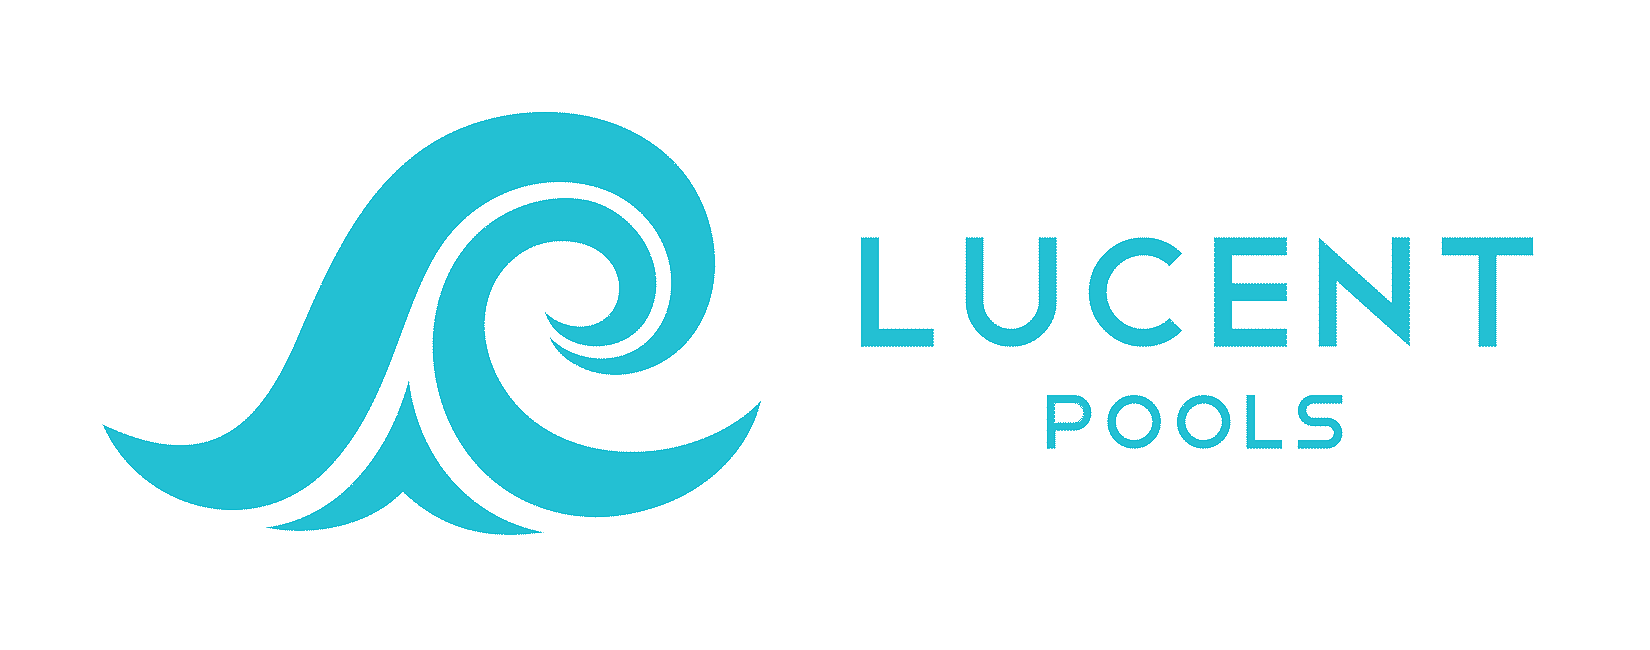 Lucent Pools